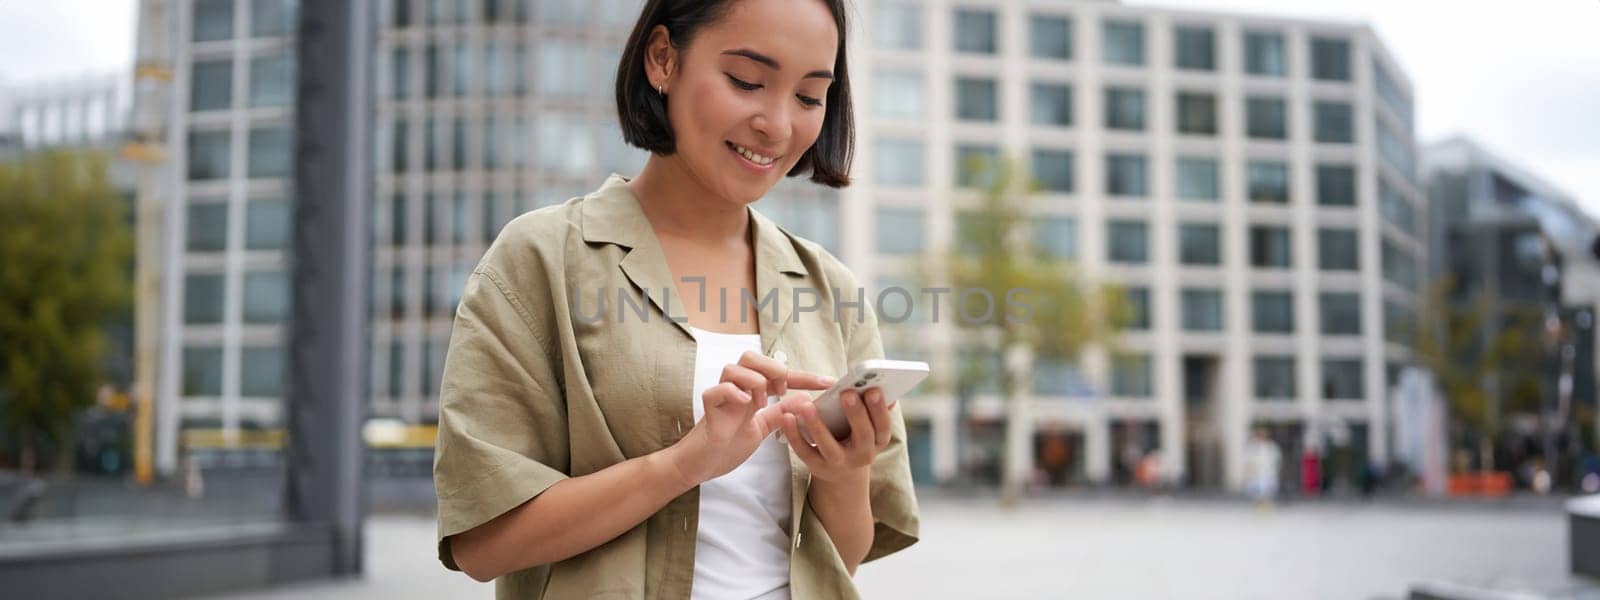 Mobile technology. Smiling asian woman using smartphone app, looking at her telephone on street, checking map, calling or texting someone.